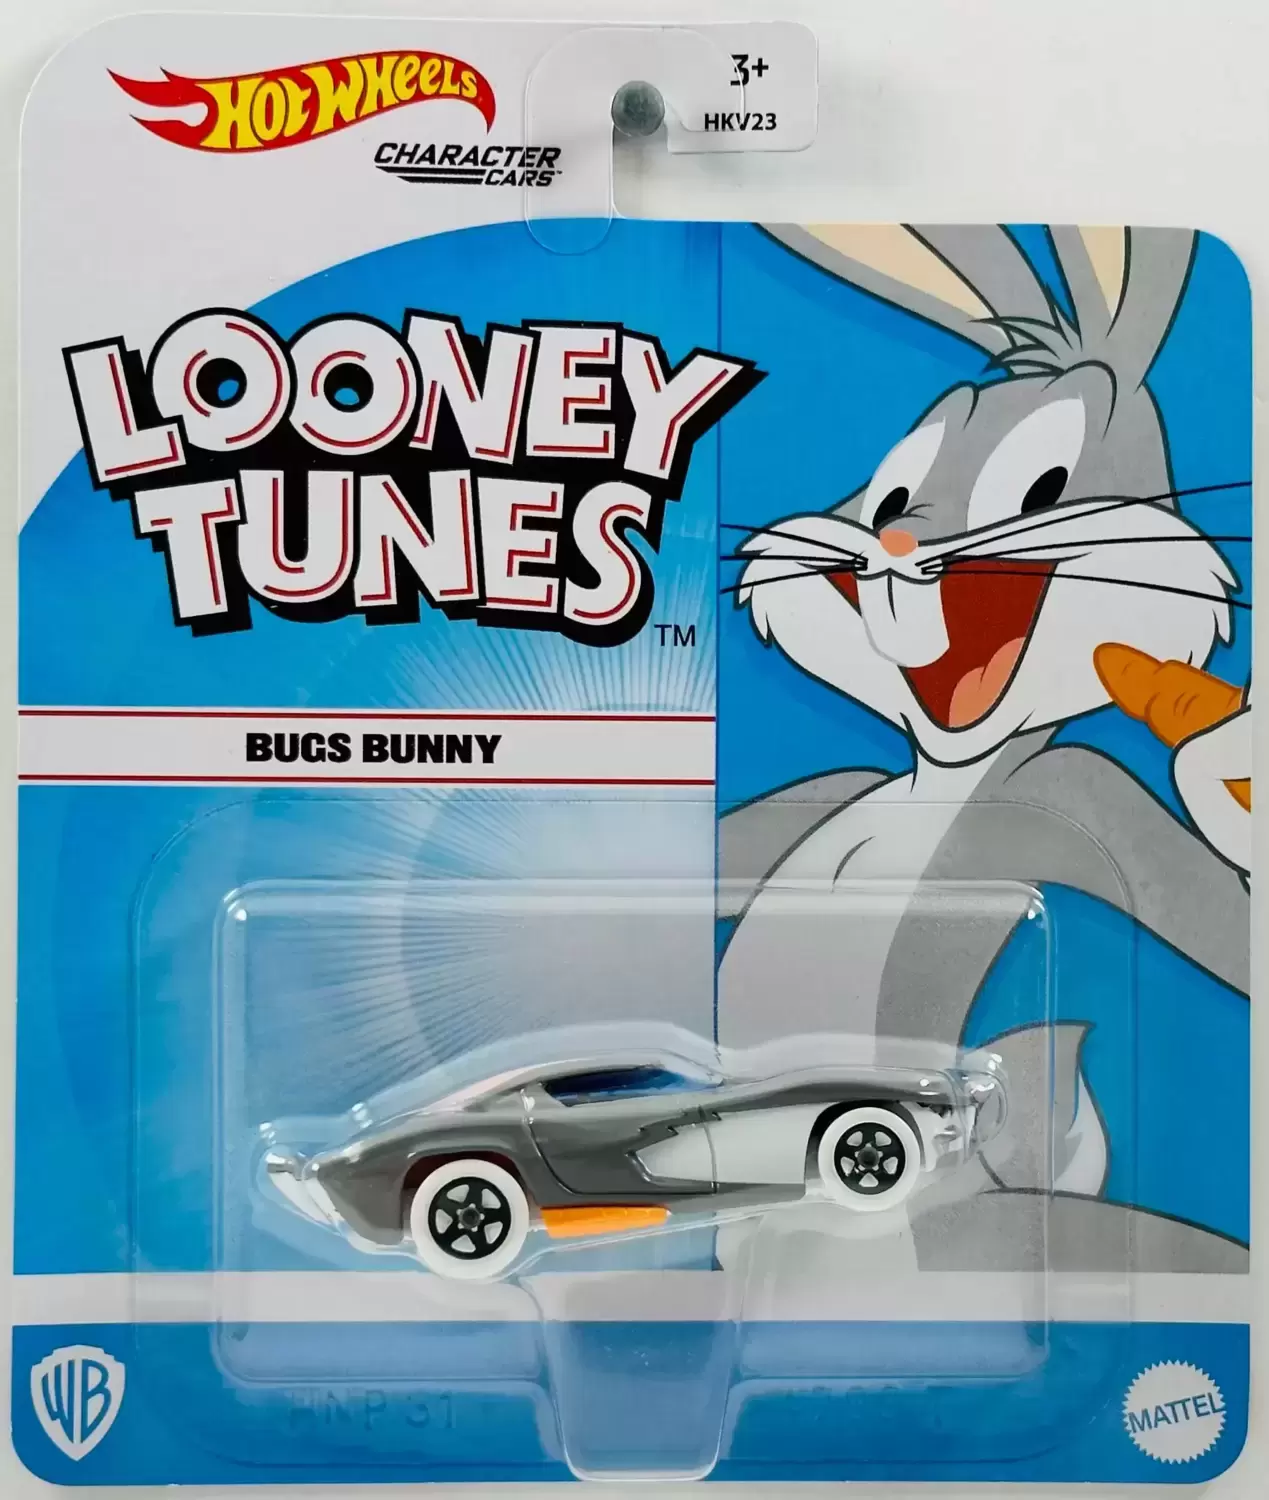 Looney Tunes Character Cars - Bugs Bunny